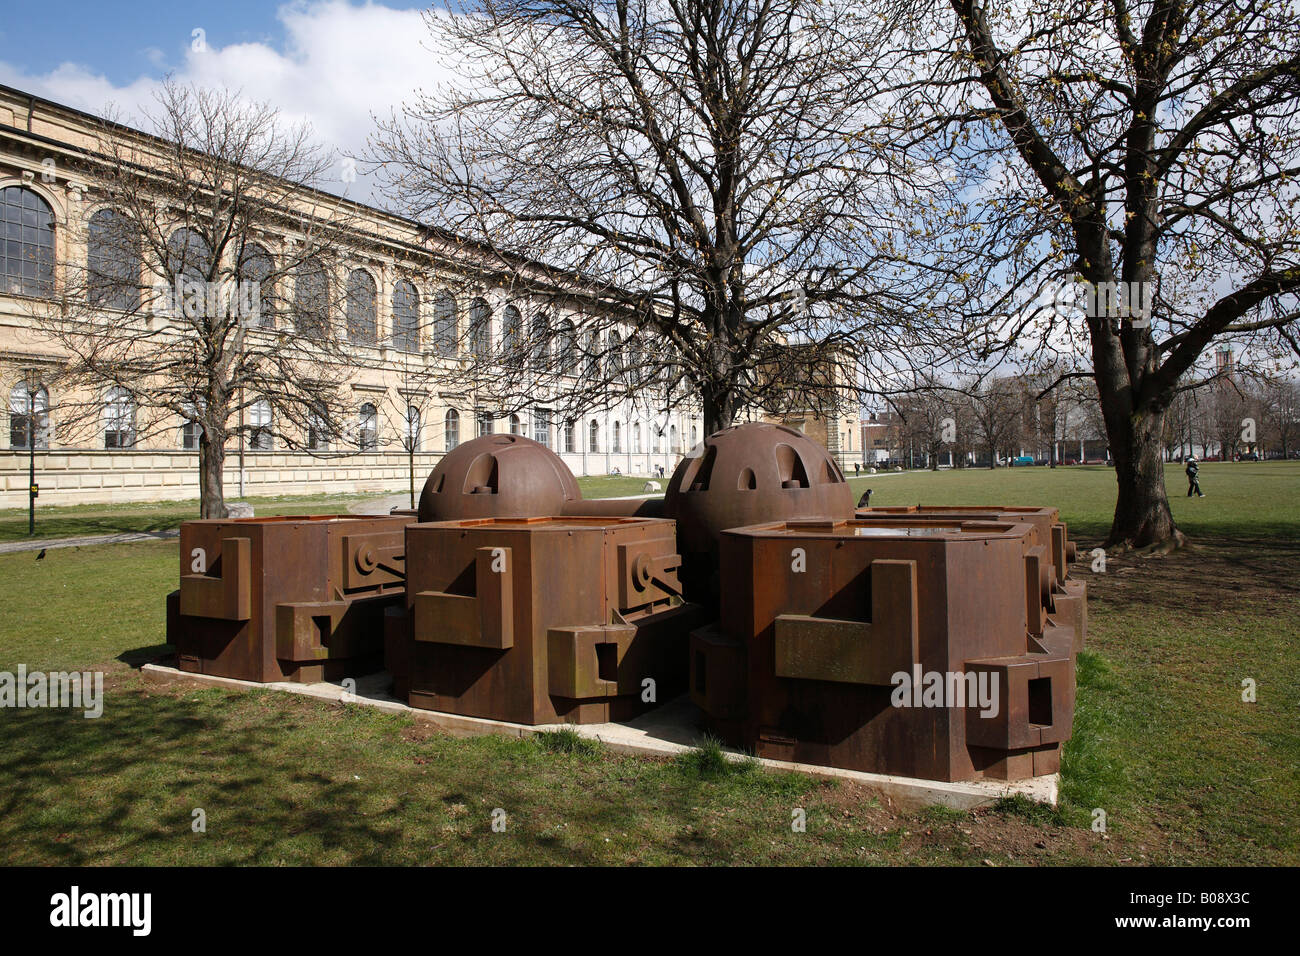 Sculpture on lawns in front of the Alte Pinakothek art gallery, Munich, Bavaria, Germany Stock Photo